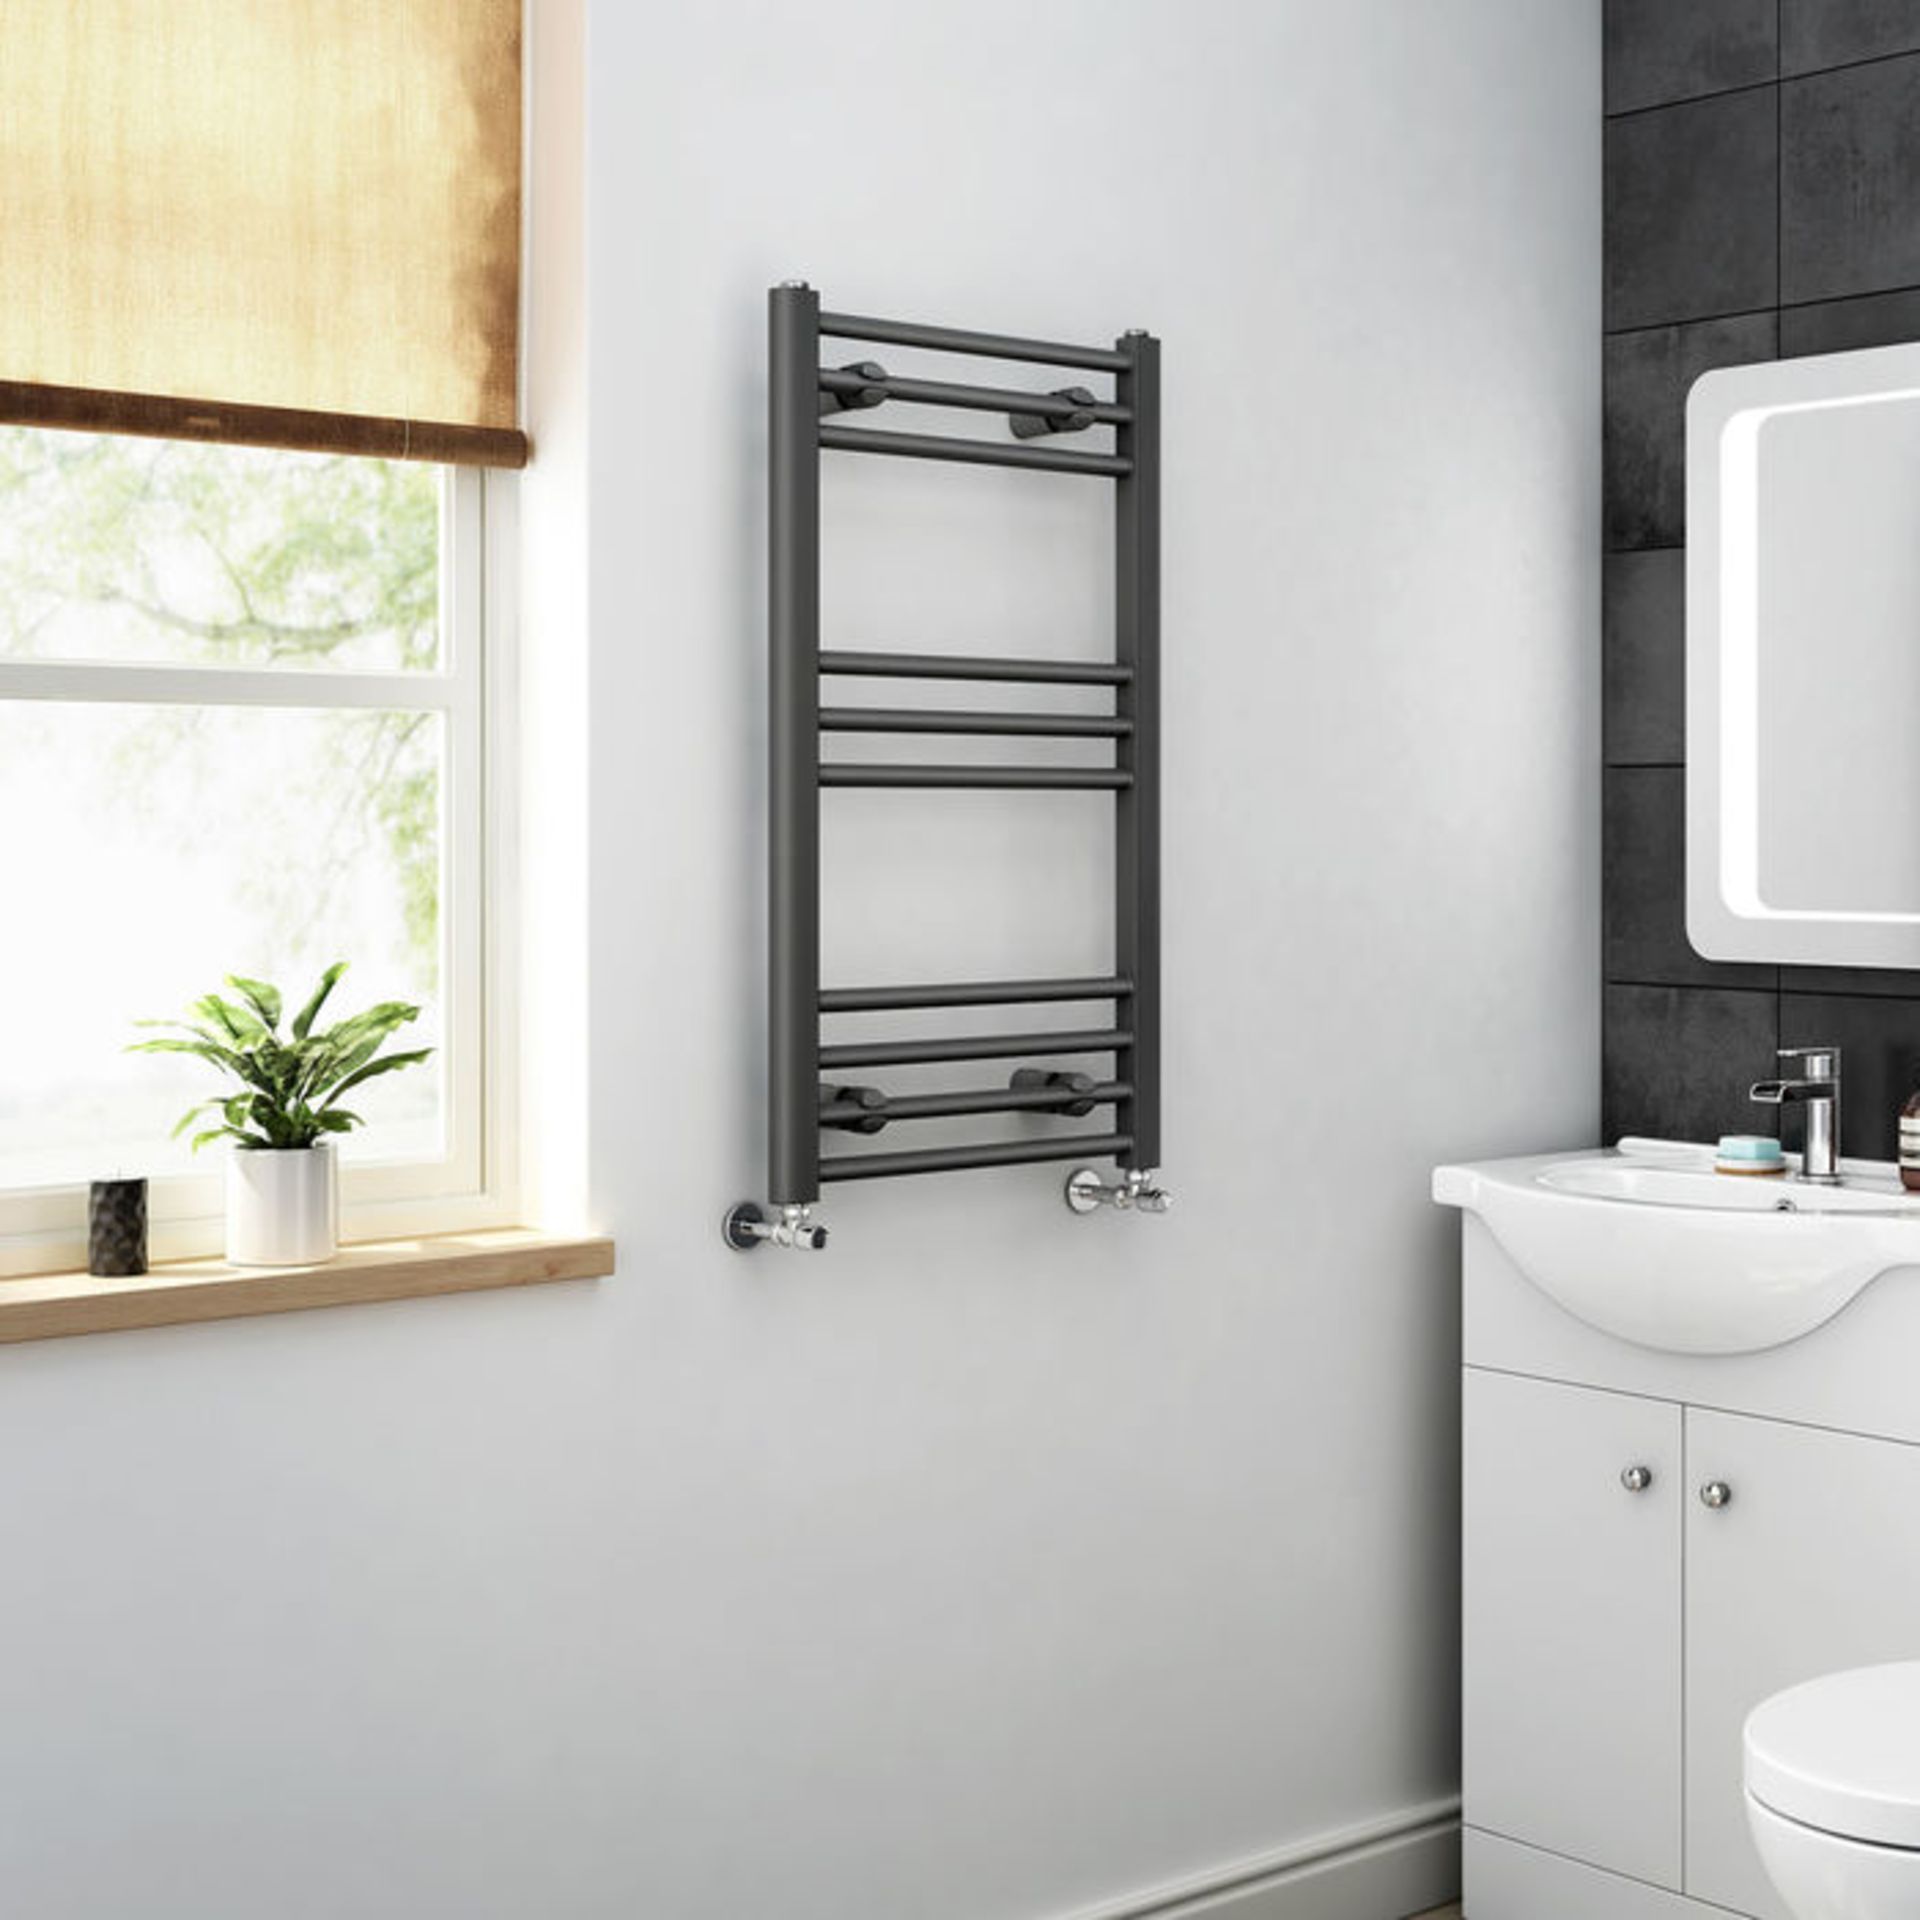 (TA261) 800x450mm - 20mm Tubes - Anthracite Heated Straight Rail Ladder Towel Radiator. Corrosion - Image 2 of 3